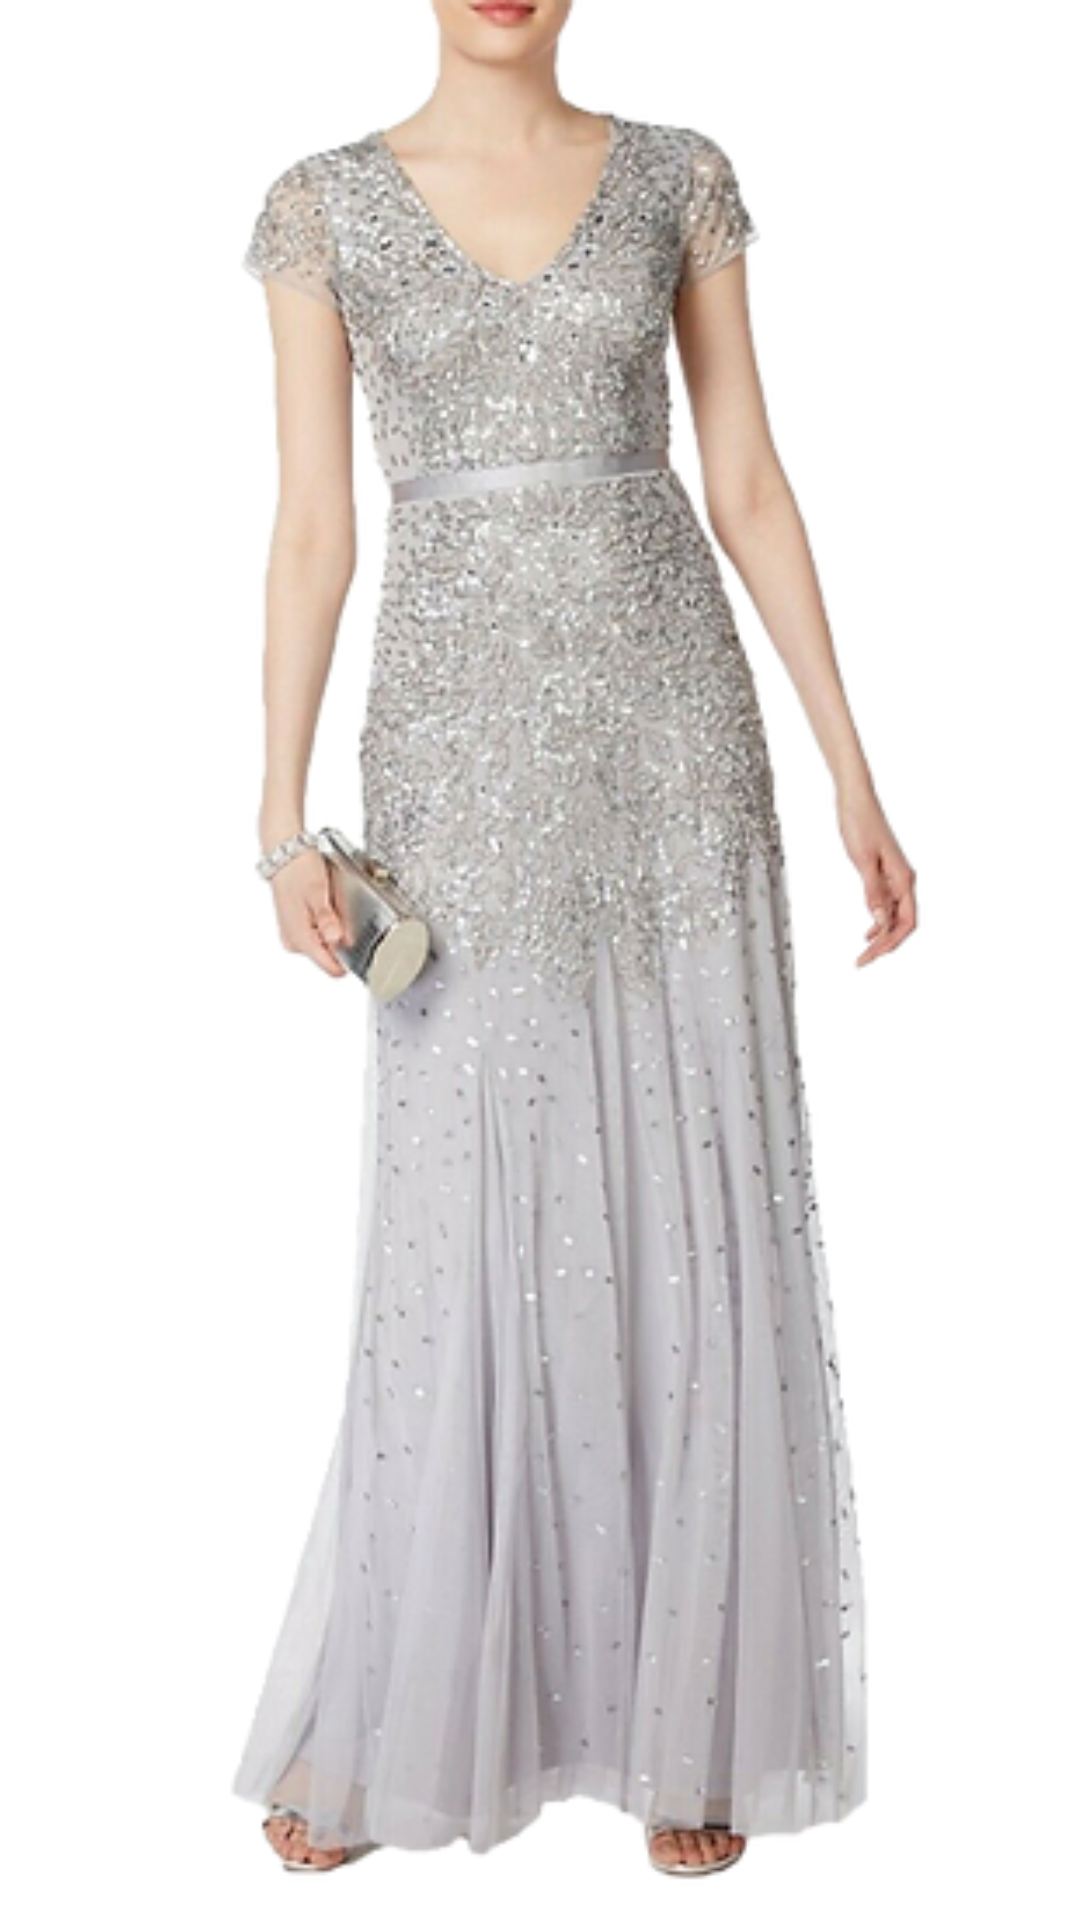 Adrianna Papell Gladys Cap Sleeved Beaded Gown in Silver